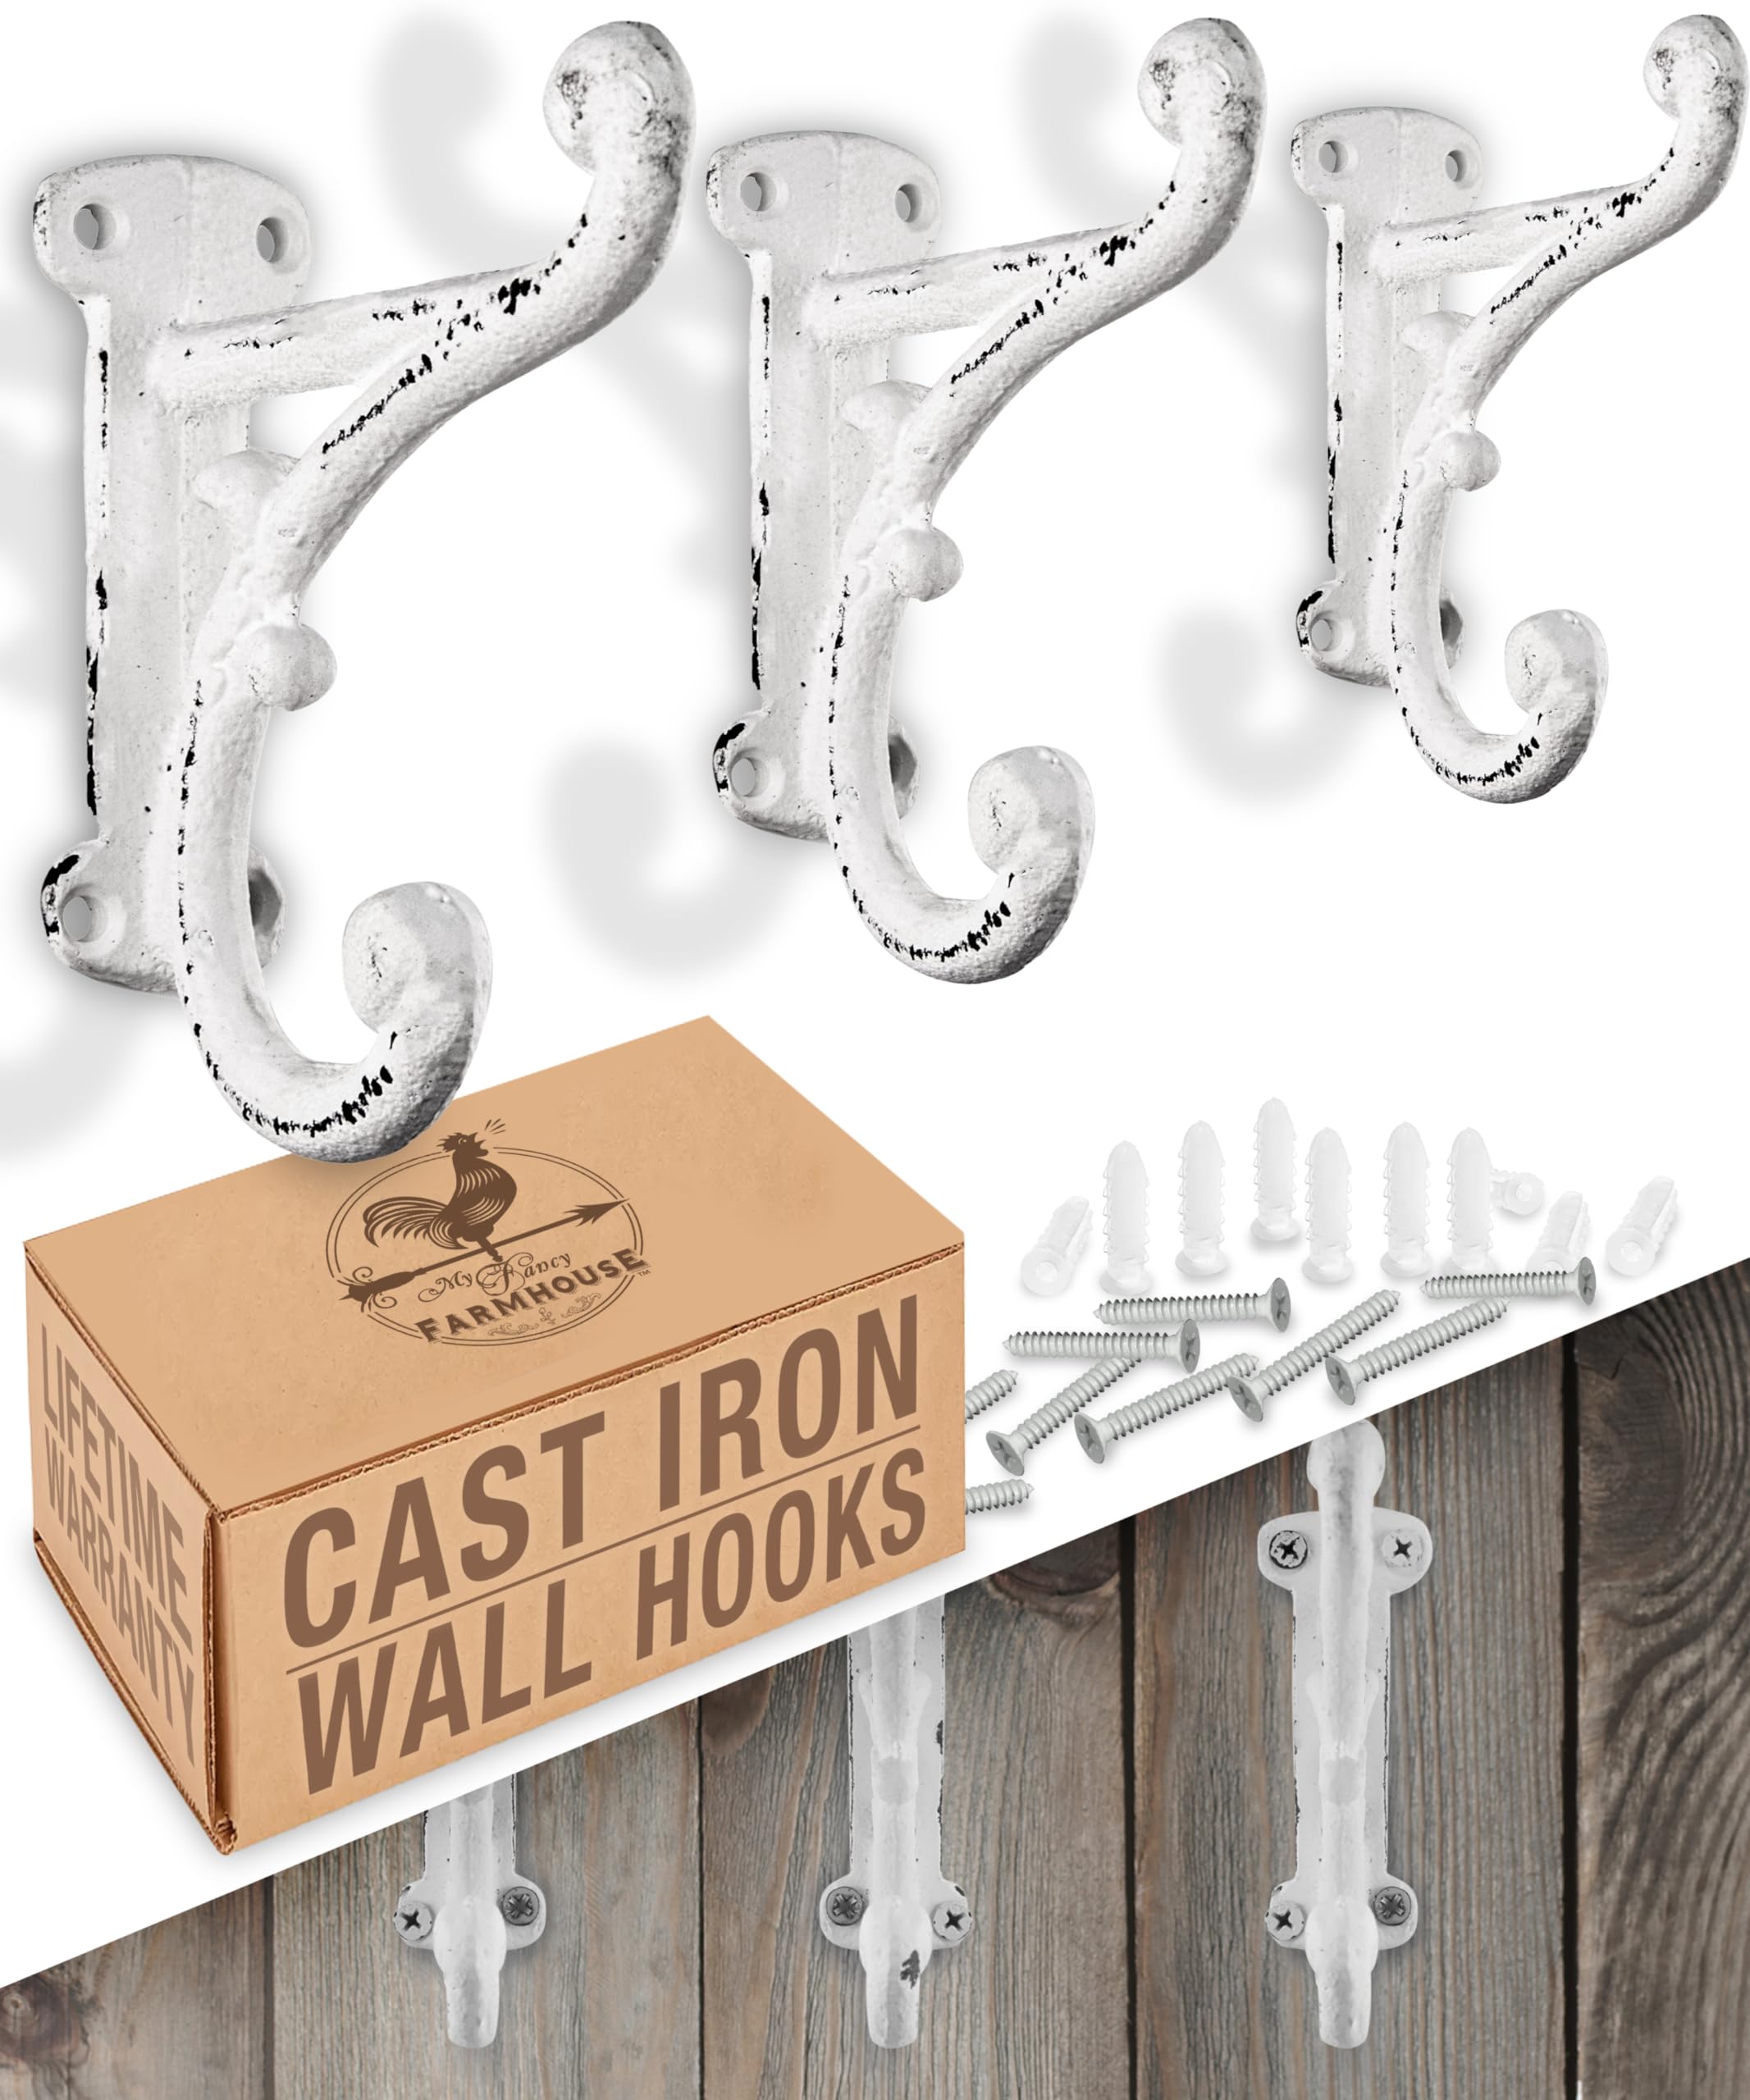 Rustic Cast Iron Coat Hooks (3 Pack) Antique White and Dark Brown, Wall Mounted, Farmhouse Decorative, Heavy Duty Wall Hooks for Hanging Coats, Hats, Towels (Mounting Hardware Included)